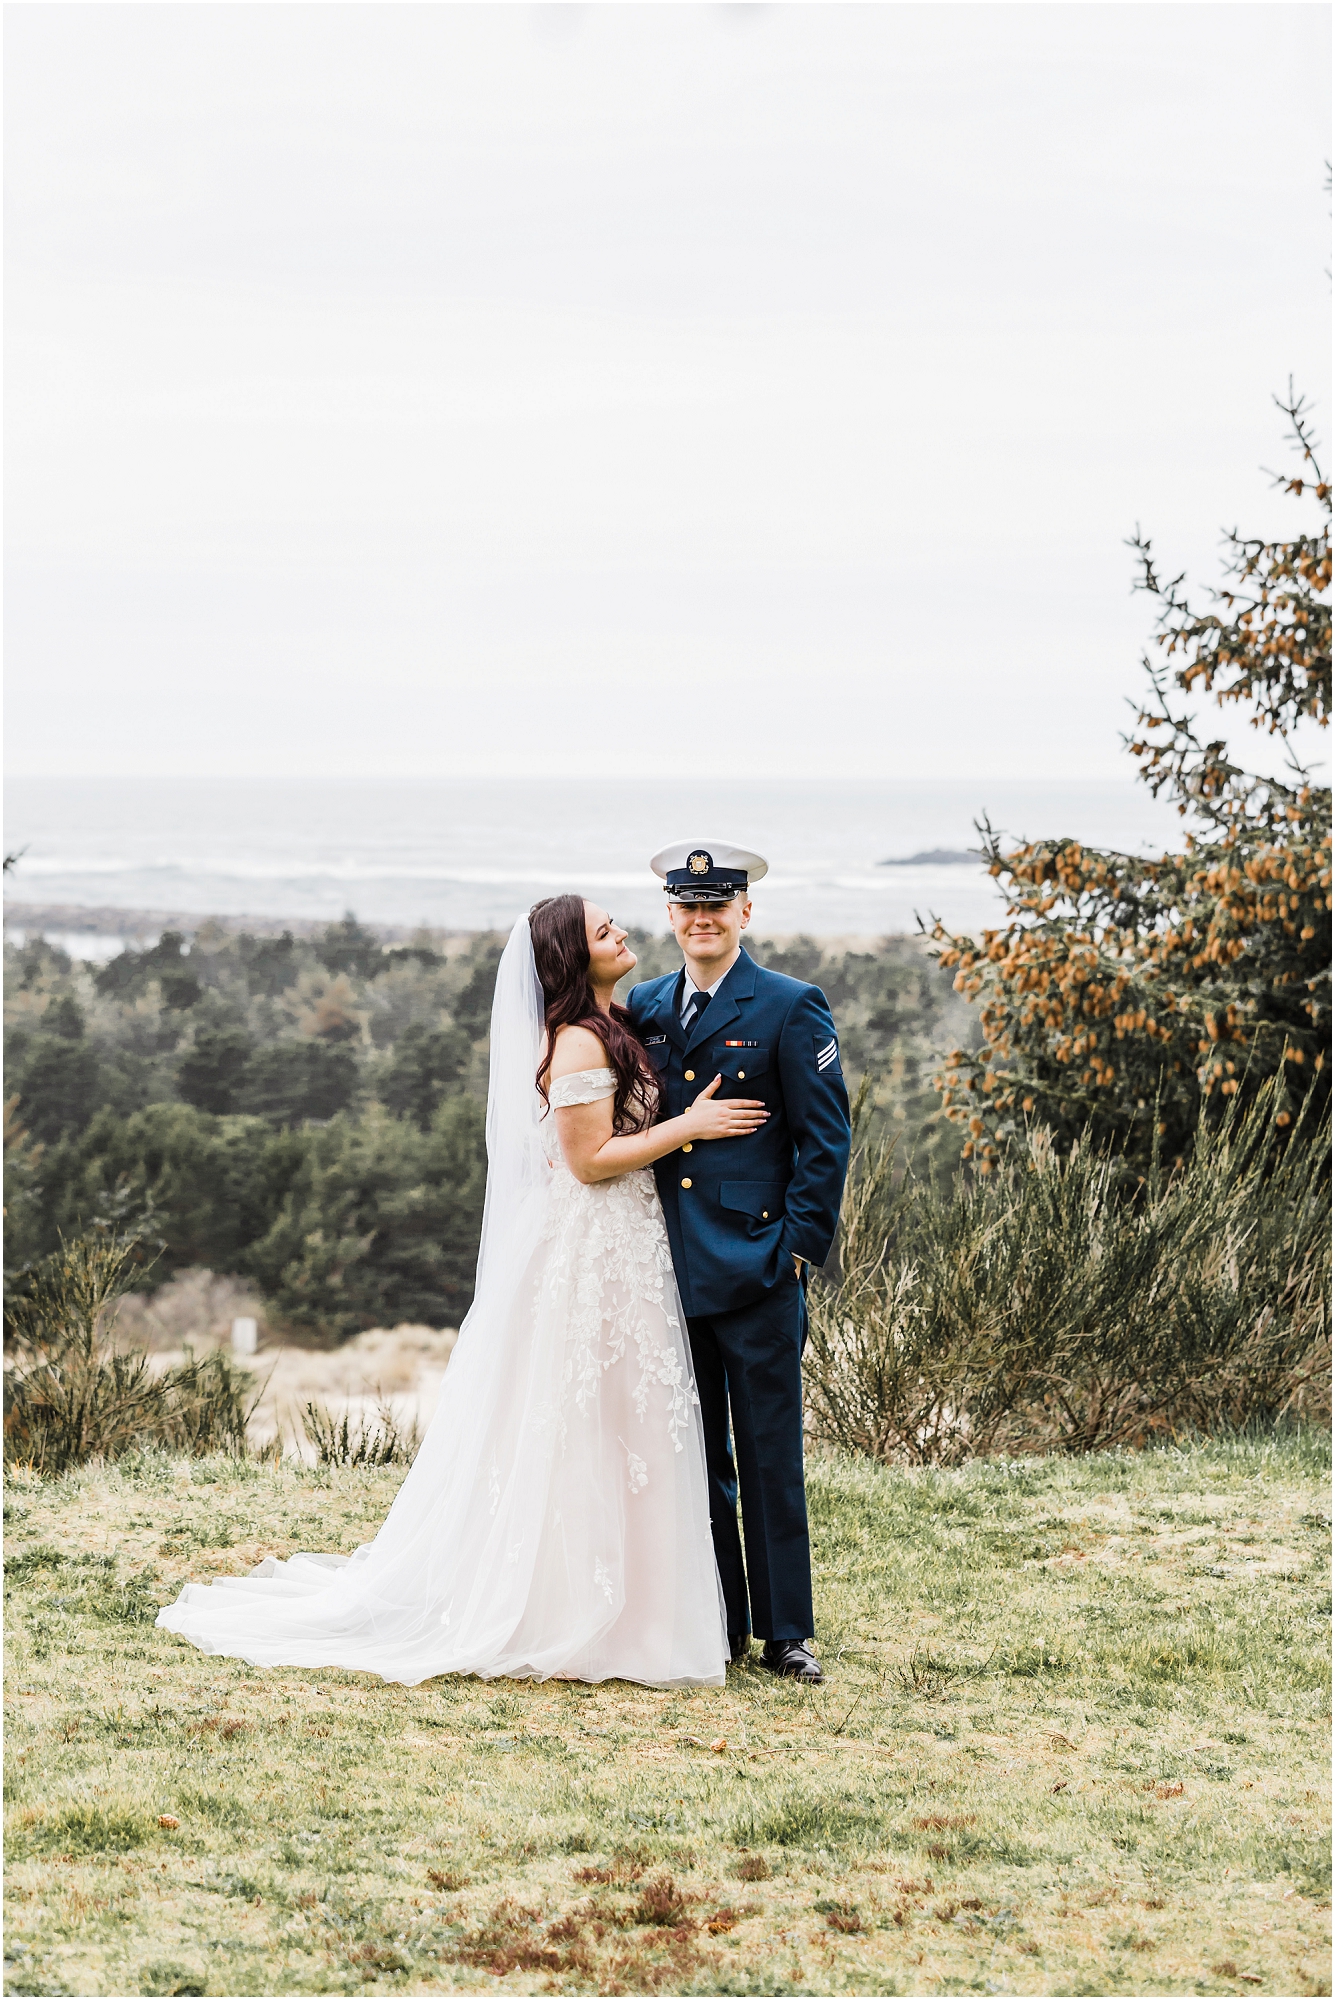 A groom, wearing his navy US Coast Guard uniform, and a bride wearing a blush pink off the shoulder gown, with a long white veil, pose together on a grassy overlook above the ocean for this Oregon Coast Guard Elopement in Winchester Bay. | Erica Swantek Photography